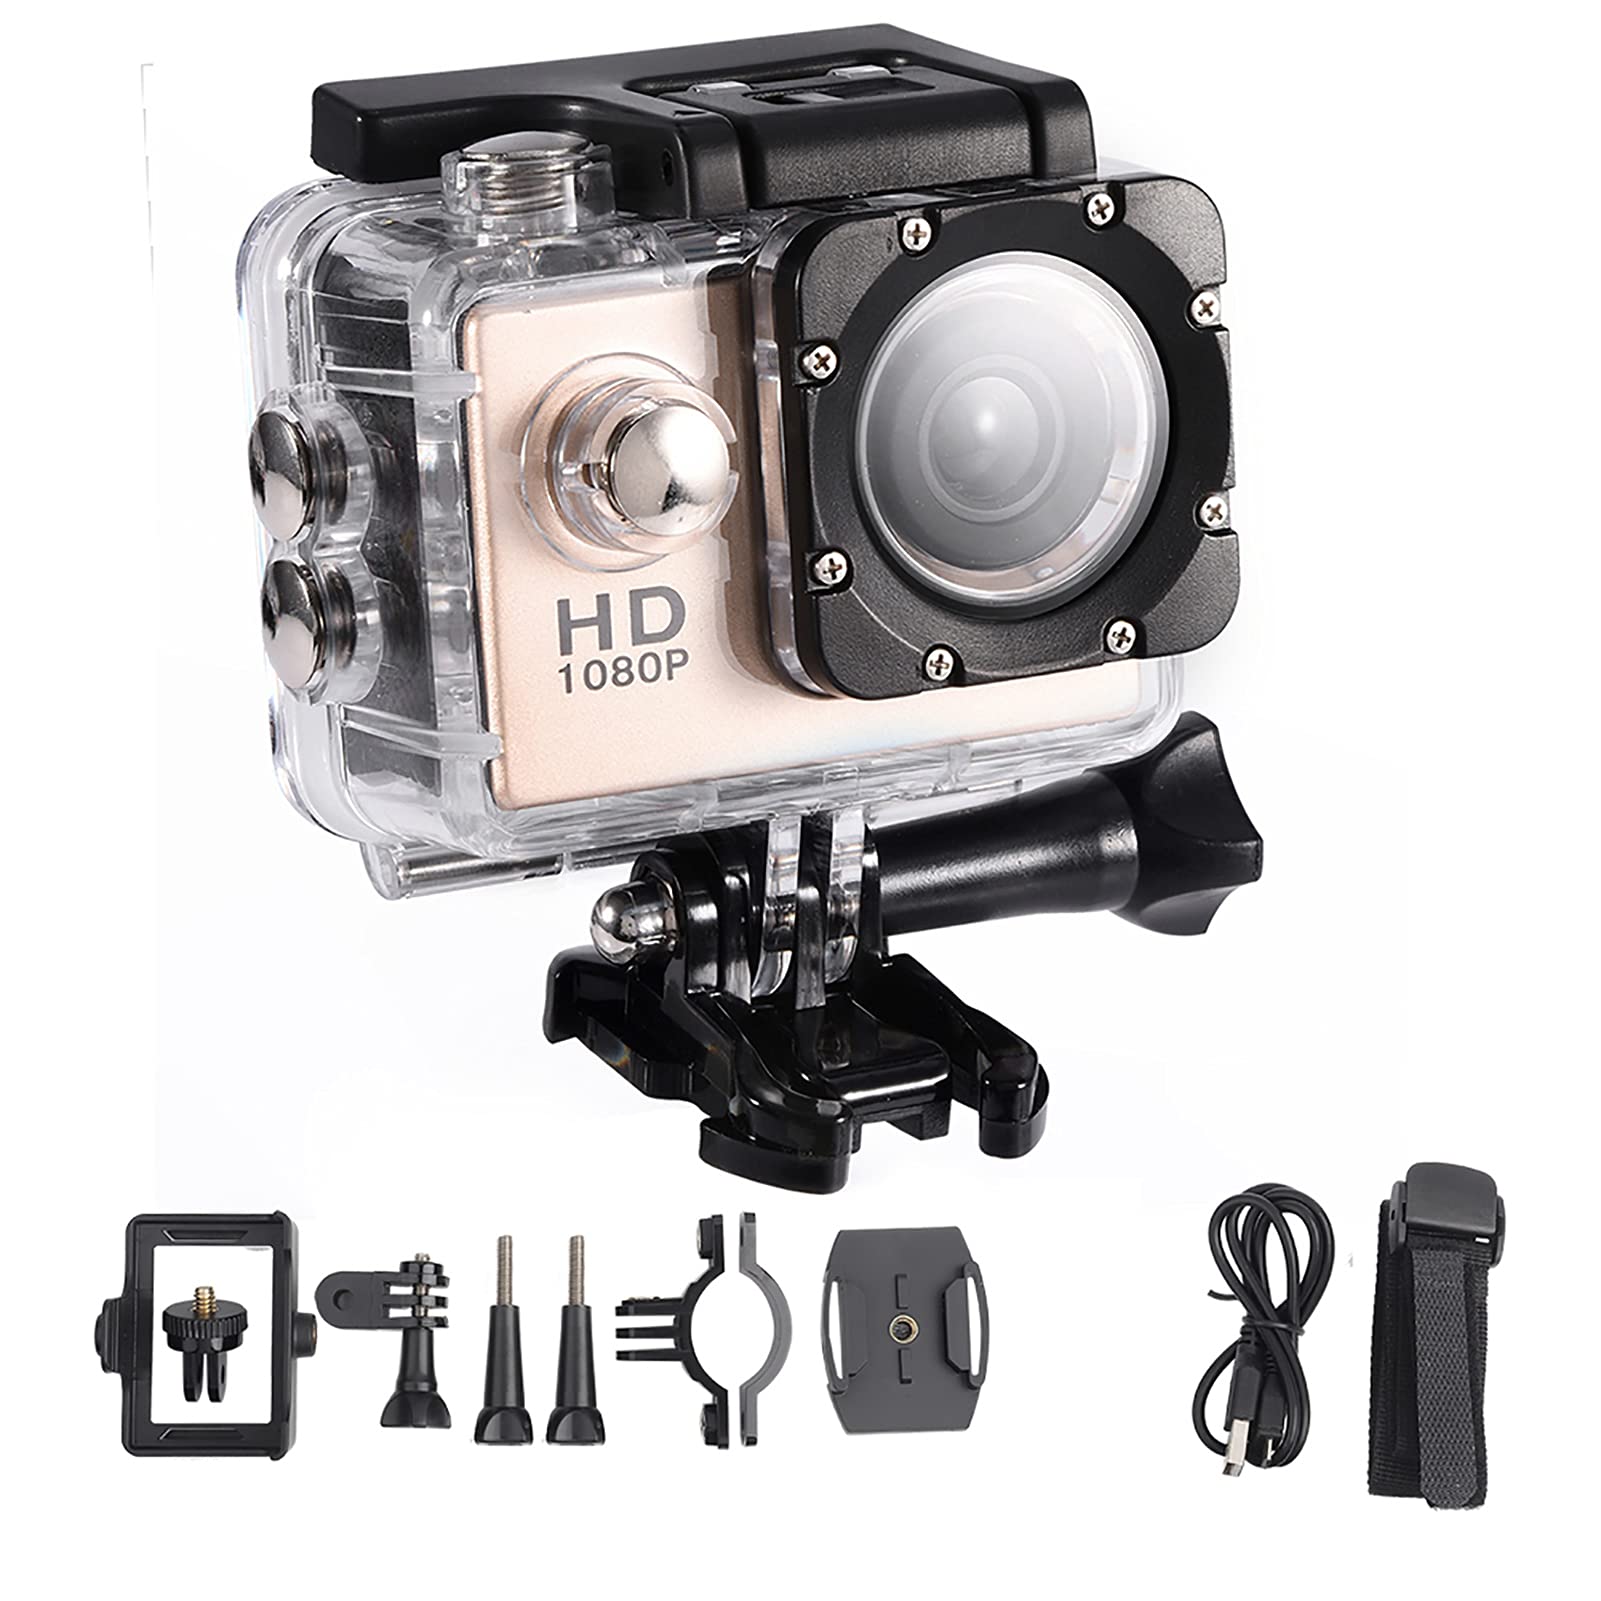 Serounder Action Camera 12MP Waterproof 30m Outdoor Sports Video Camera 1080P Full LCD Mini Camcorder with 900mAh Rechargeable Batteries and Mounting Accessories Kits(Gold)